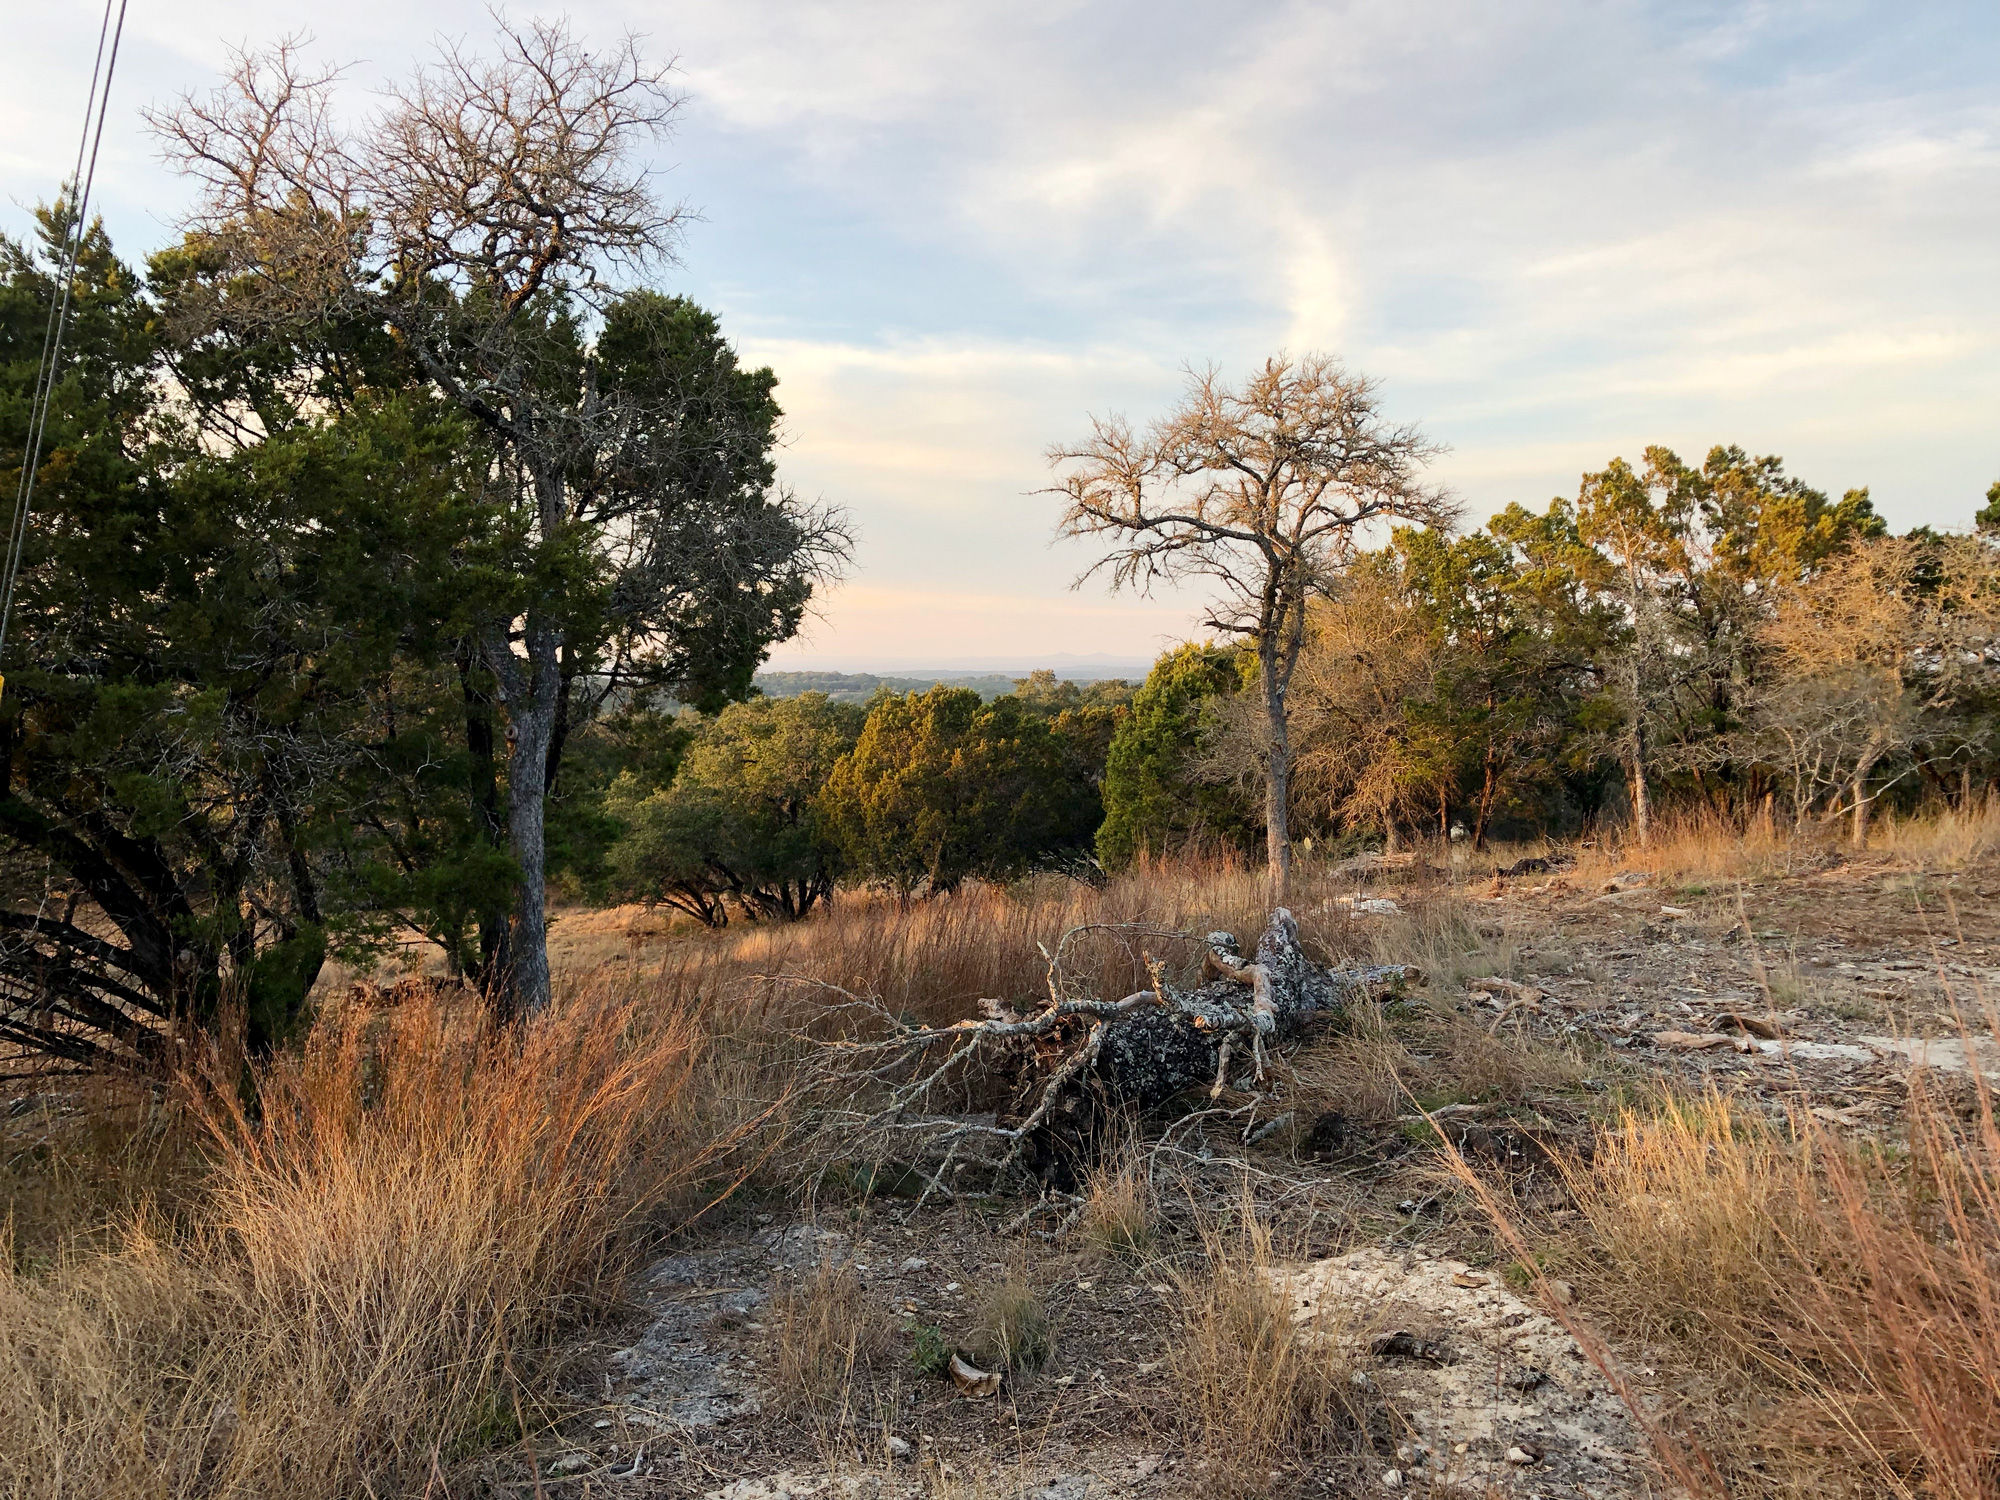 A beautiful hill country landscape at sunset.